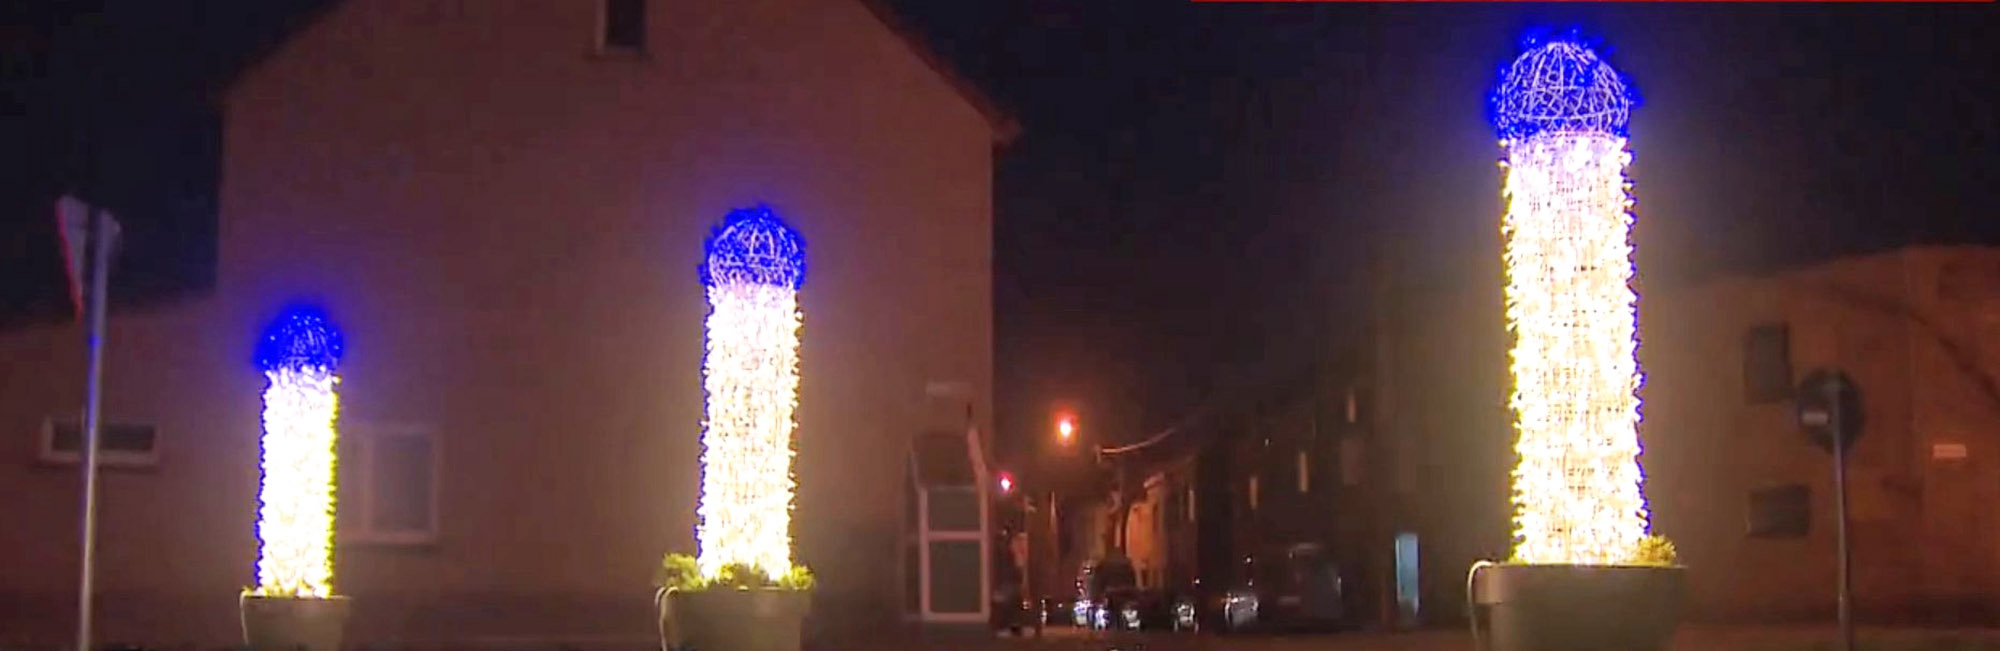 Read more about the article Belgian Mayor Admits Bungling After Council Workers Built Phallic-Shaped Xmas Decorations Which Were Cheaper Than Buying Online